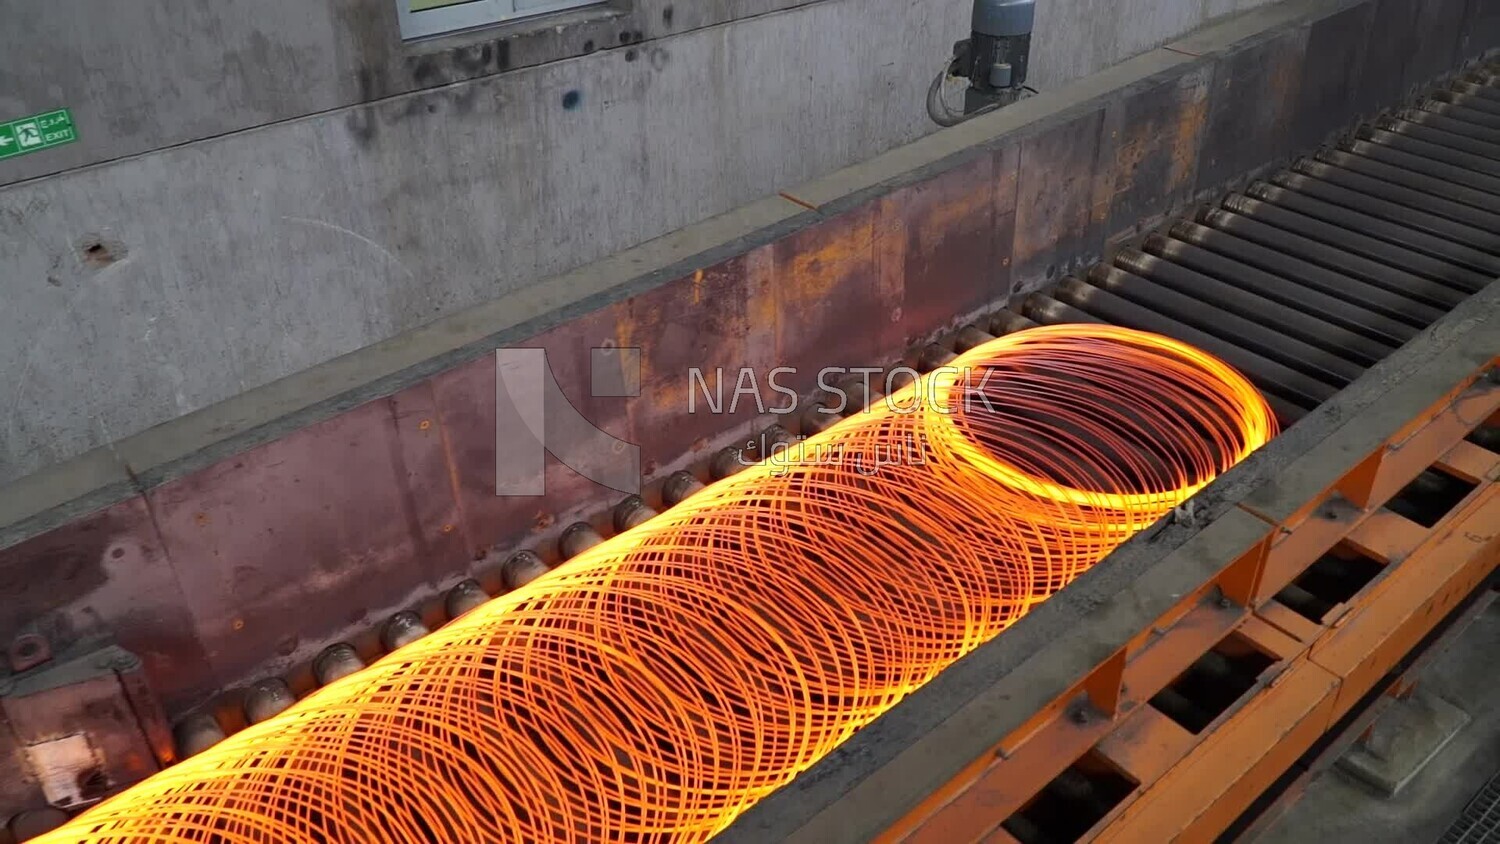 Reinforcing steel smelted in a machine